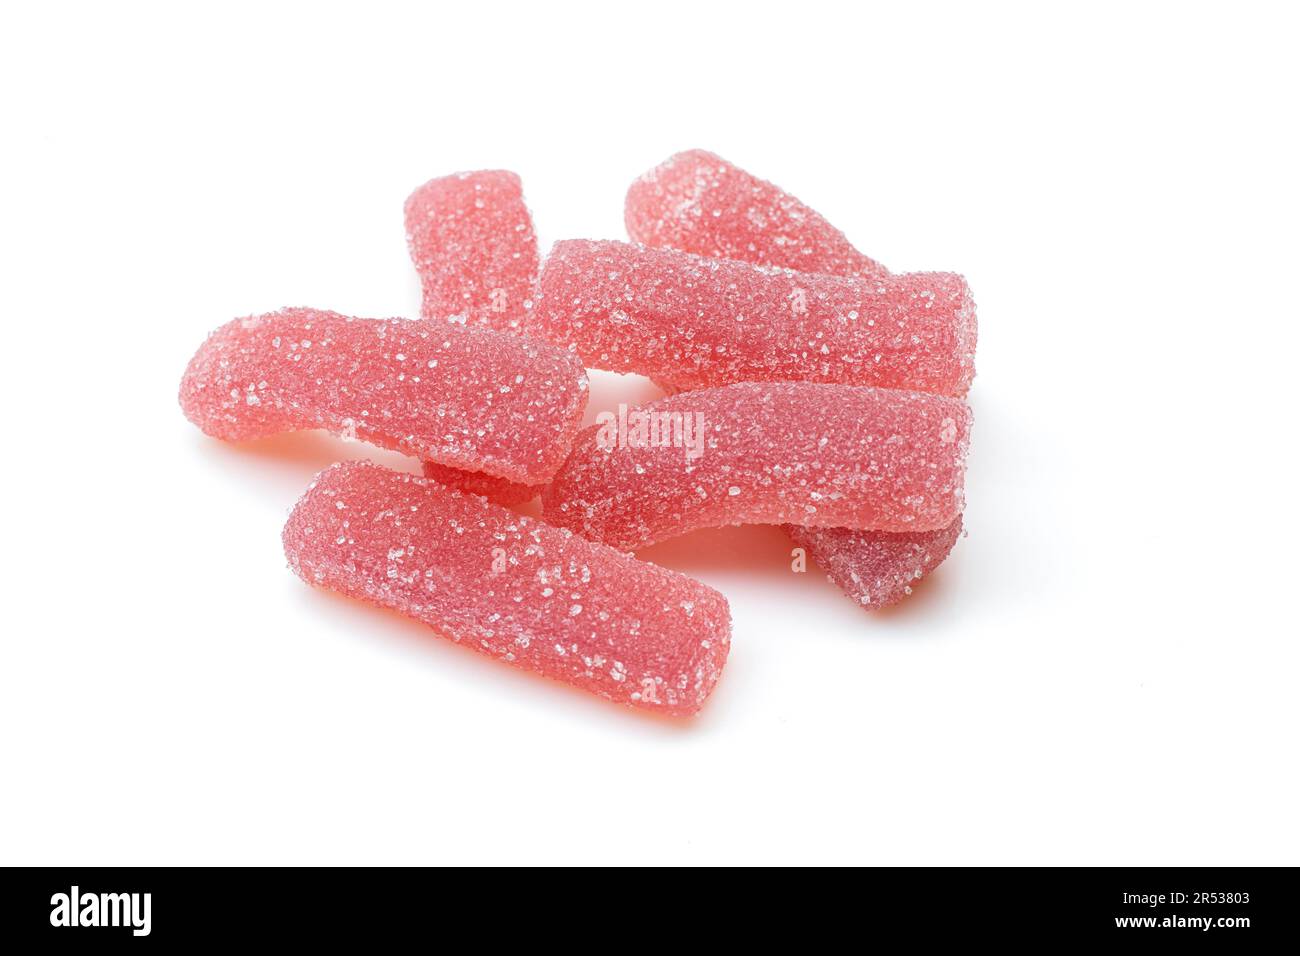 Pile of red sugary jelly candies isolated on white background. Gummy worms treat Stock Photo